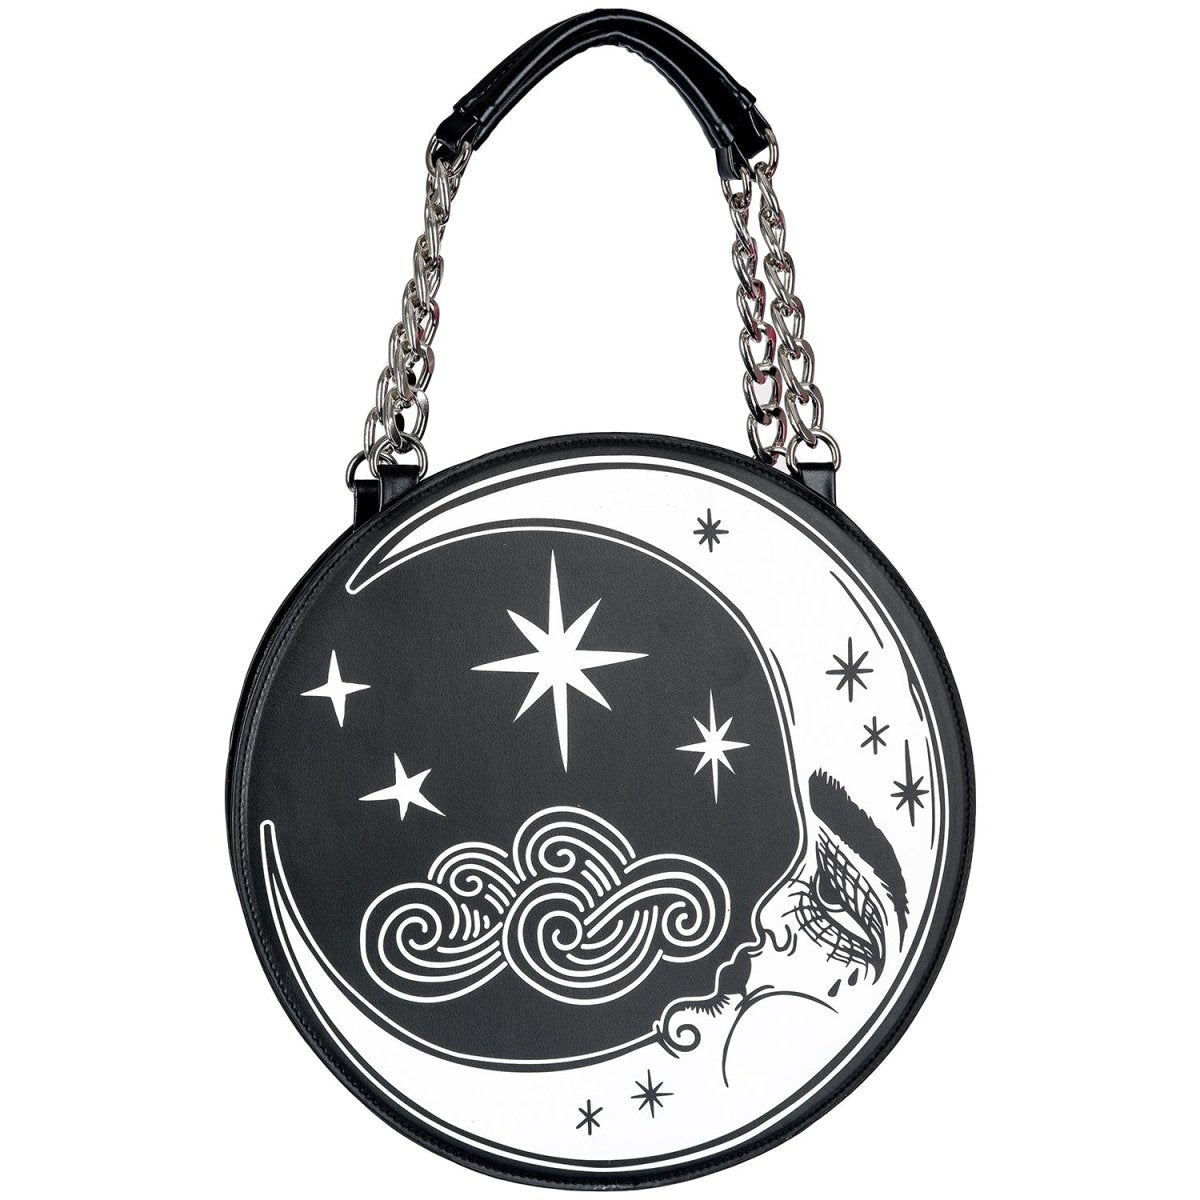 Black, witchy purse, full moon print, moon bag LUNA ROUND BAG - Restyle